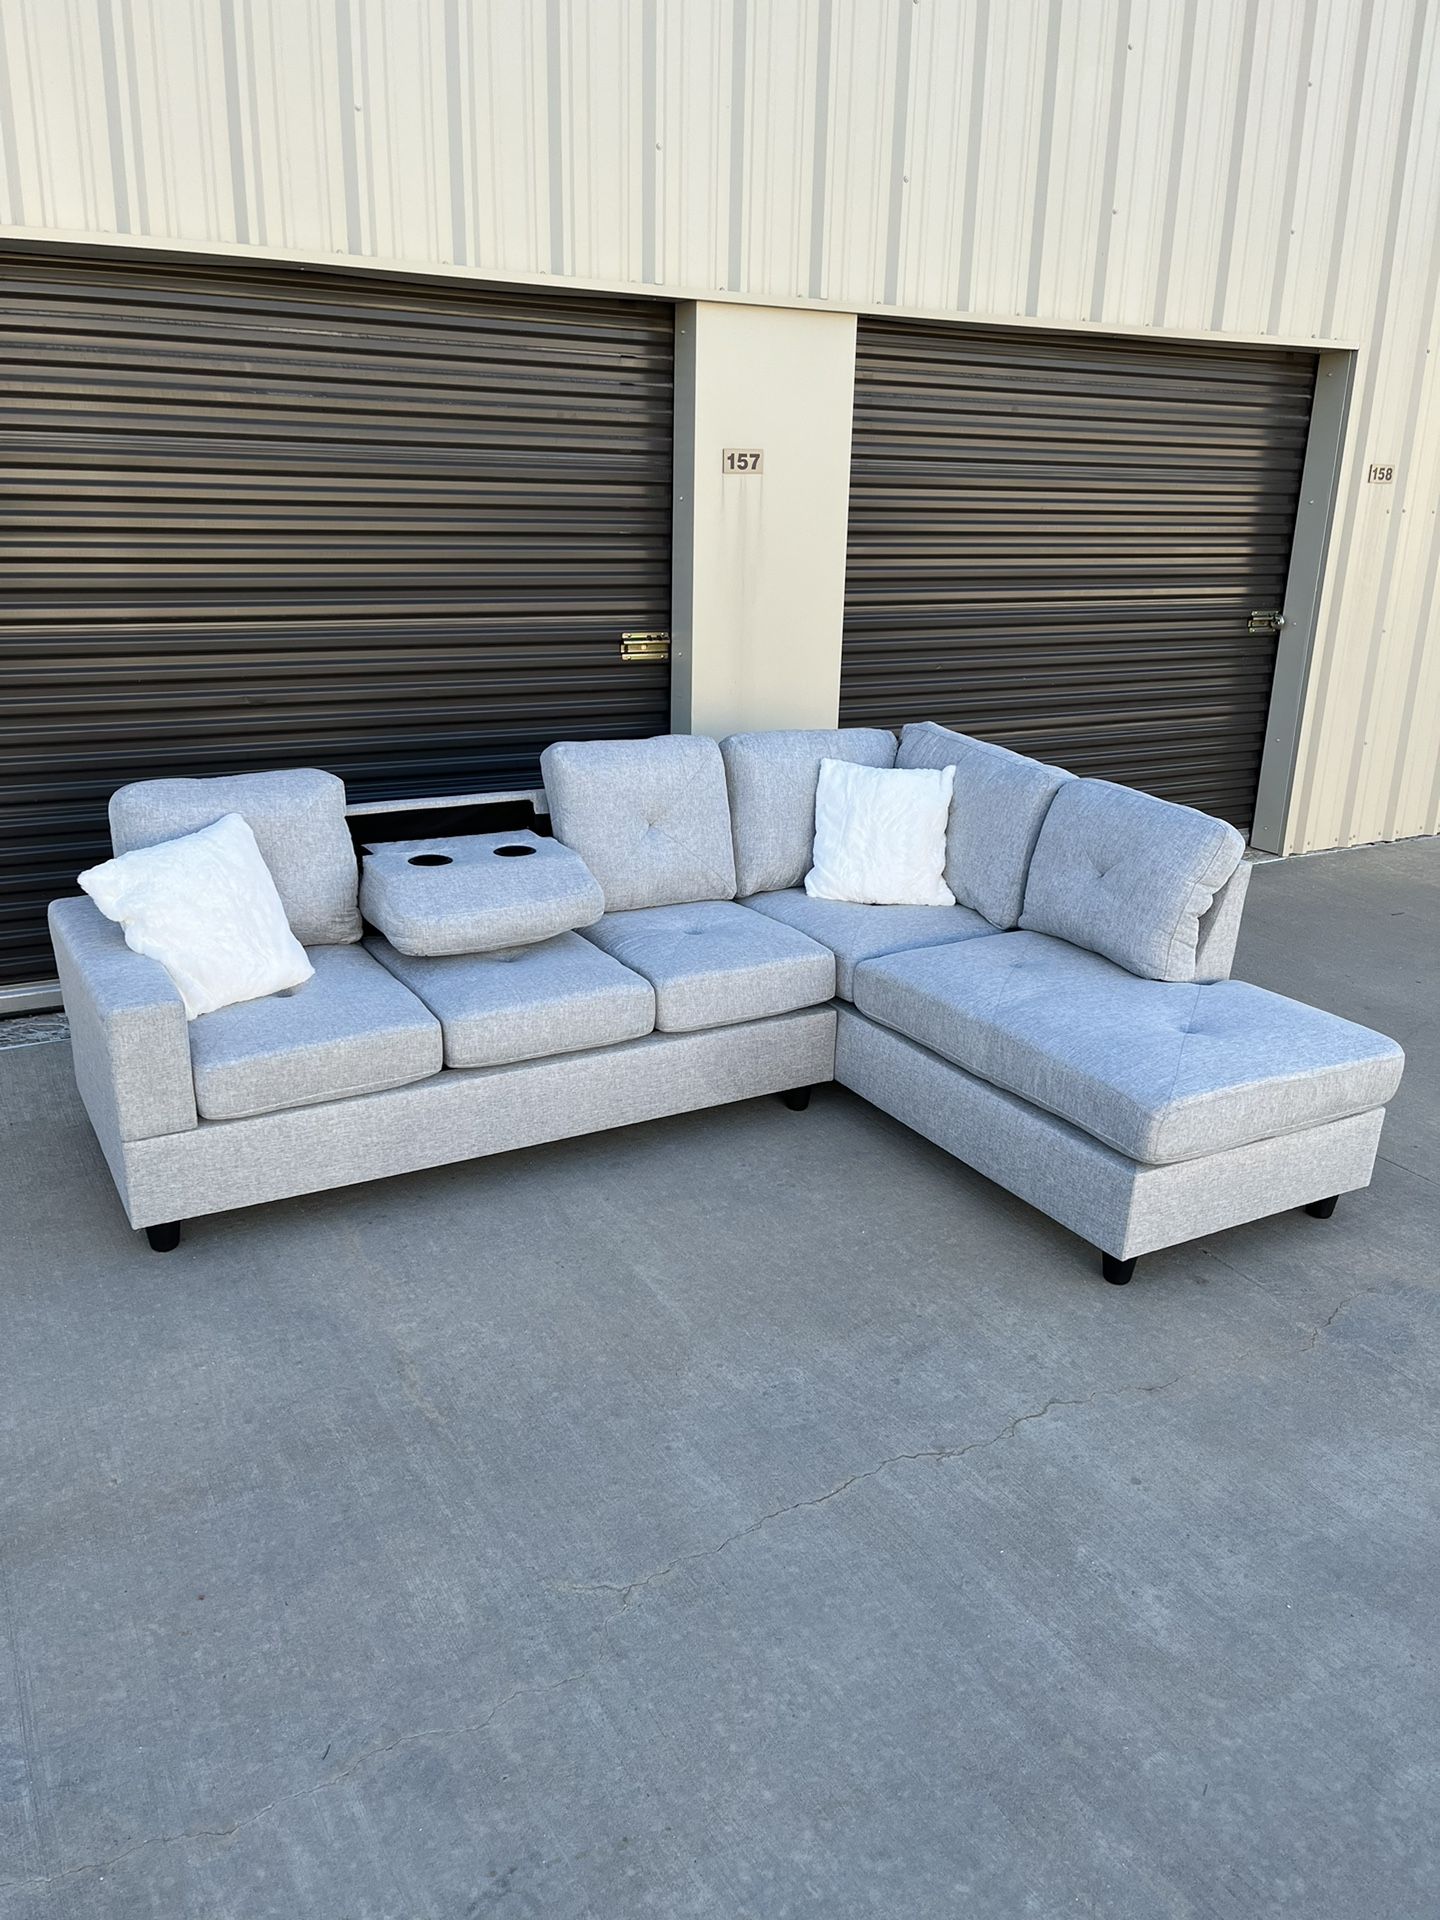 New Light Gray Sectional Couch